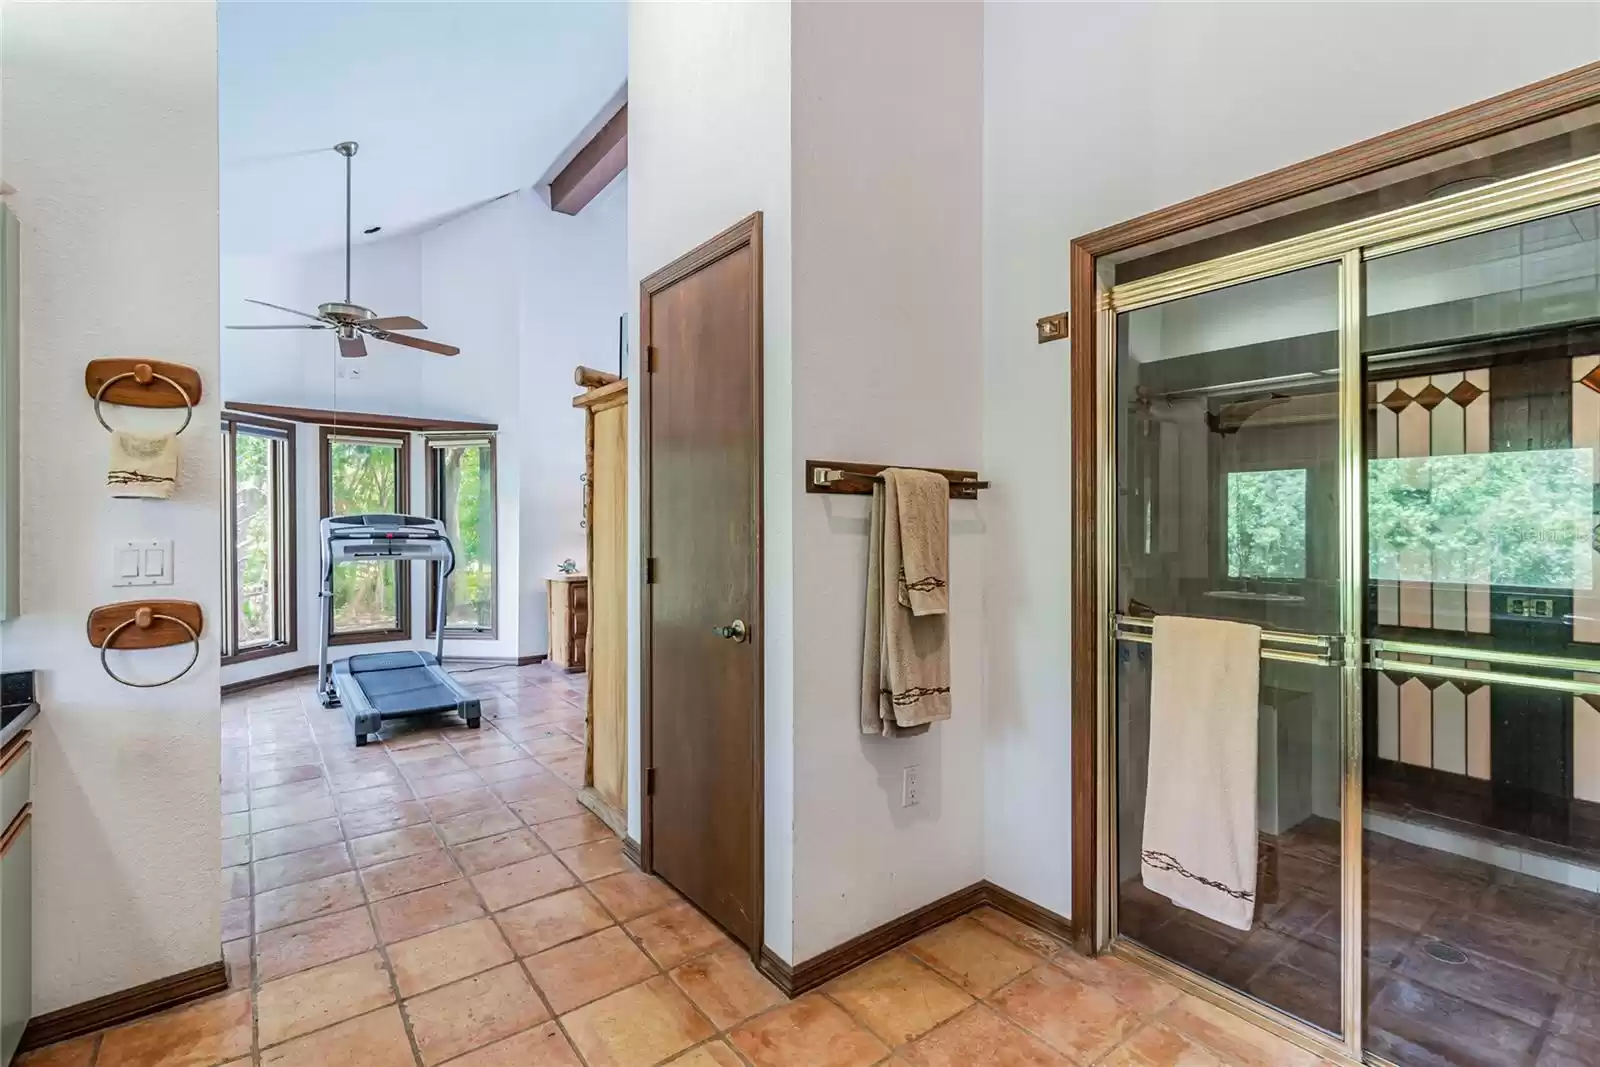 Owner's Ensuite Bathroom with dual sink vanity with large picture window showcasing serene views at the property.